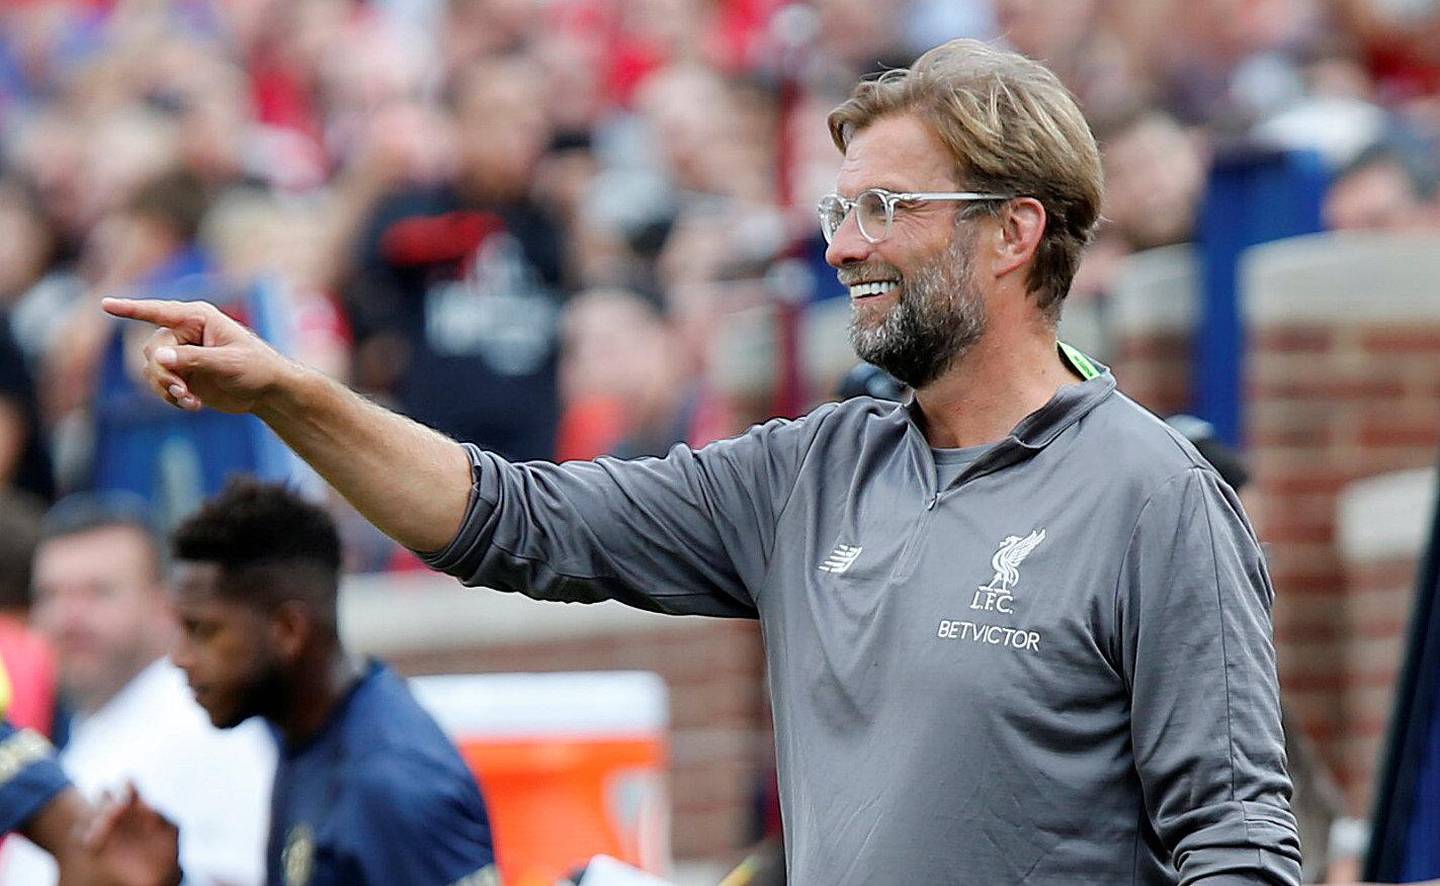 Soccer Football - International Champions Cup - Manchester United v Liverpool - Michigan Stadium, Ann Arbor, USA - July 28, 2018  Liverpool manager Juergen Klopp  REUTERS/Rebecca Cook